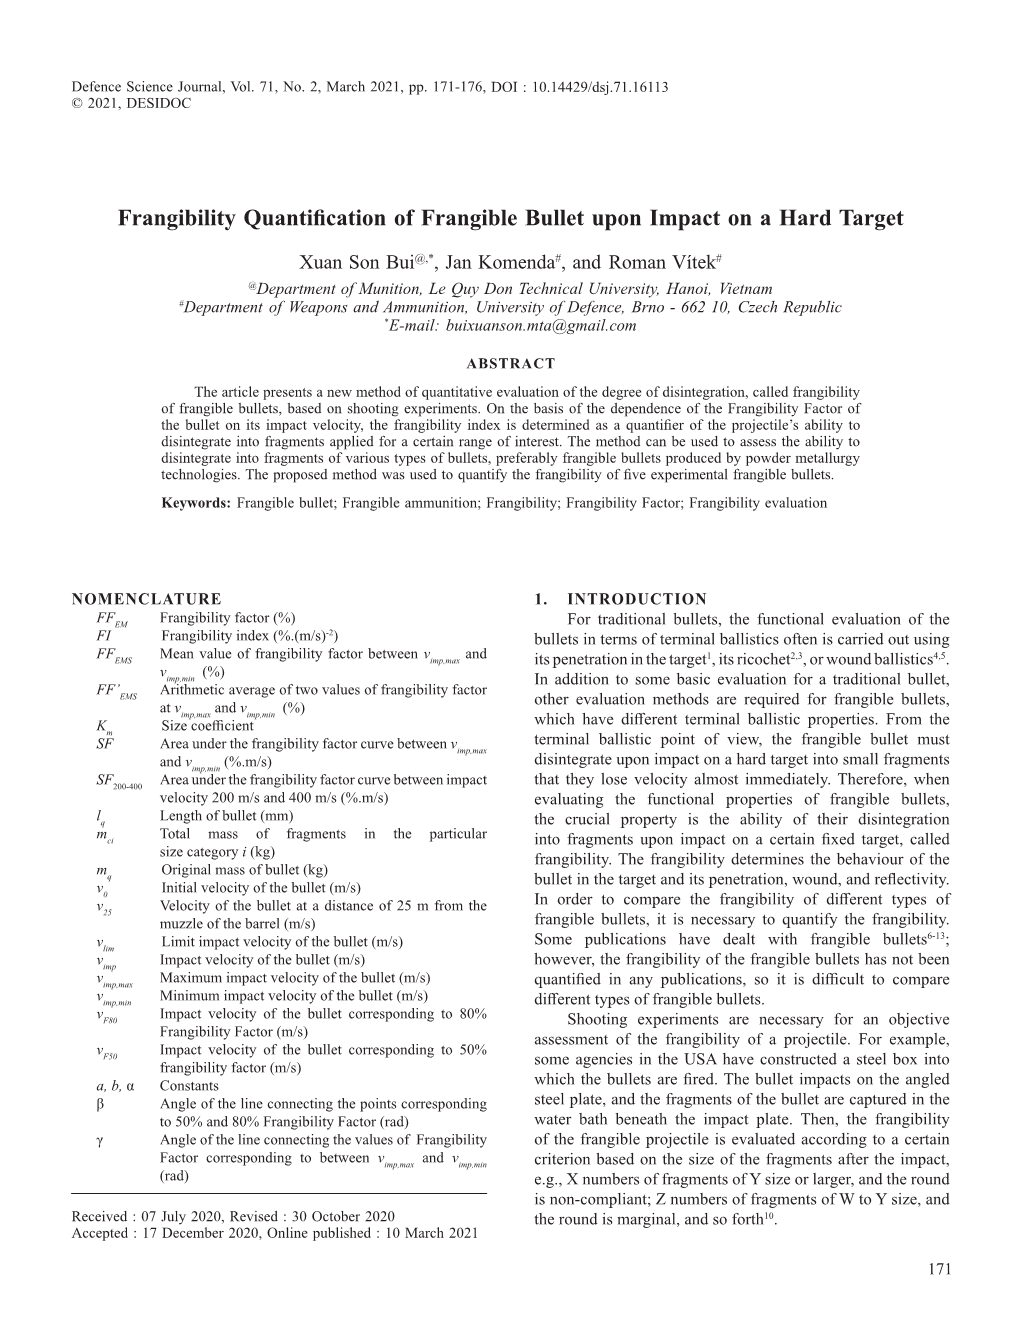 Frangibility Quantification of Frangible Bullet Upon Impact on a Hard Target